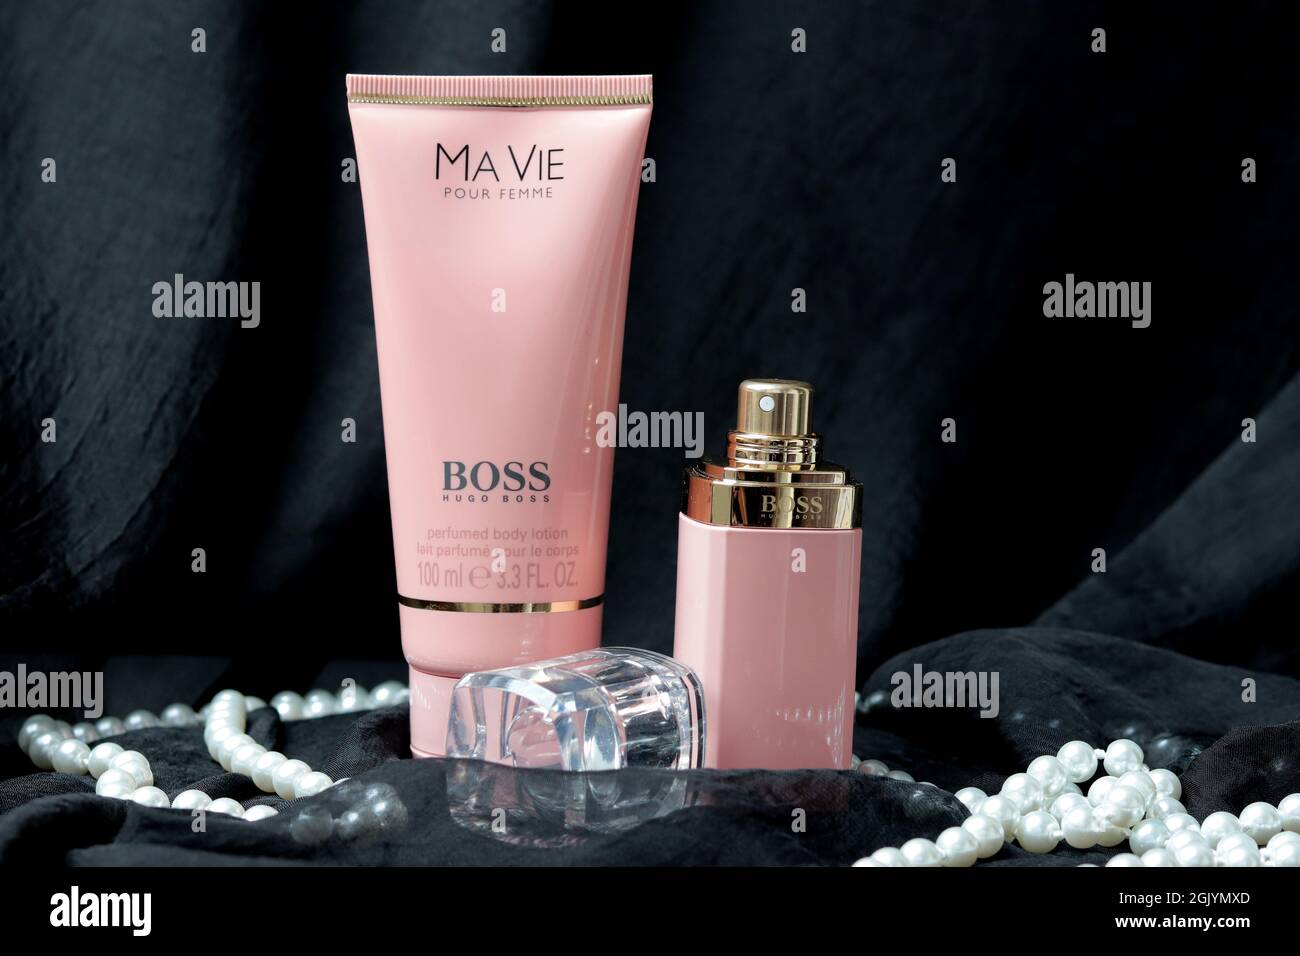 BERLIN, GERMANY - Aug 26, 2021: A Boss Ma Vie Body Lotion with Perfume on  black fabric with pearls Stock Photo - Alamy